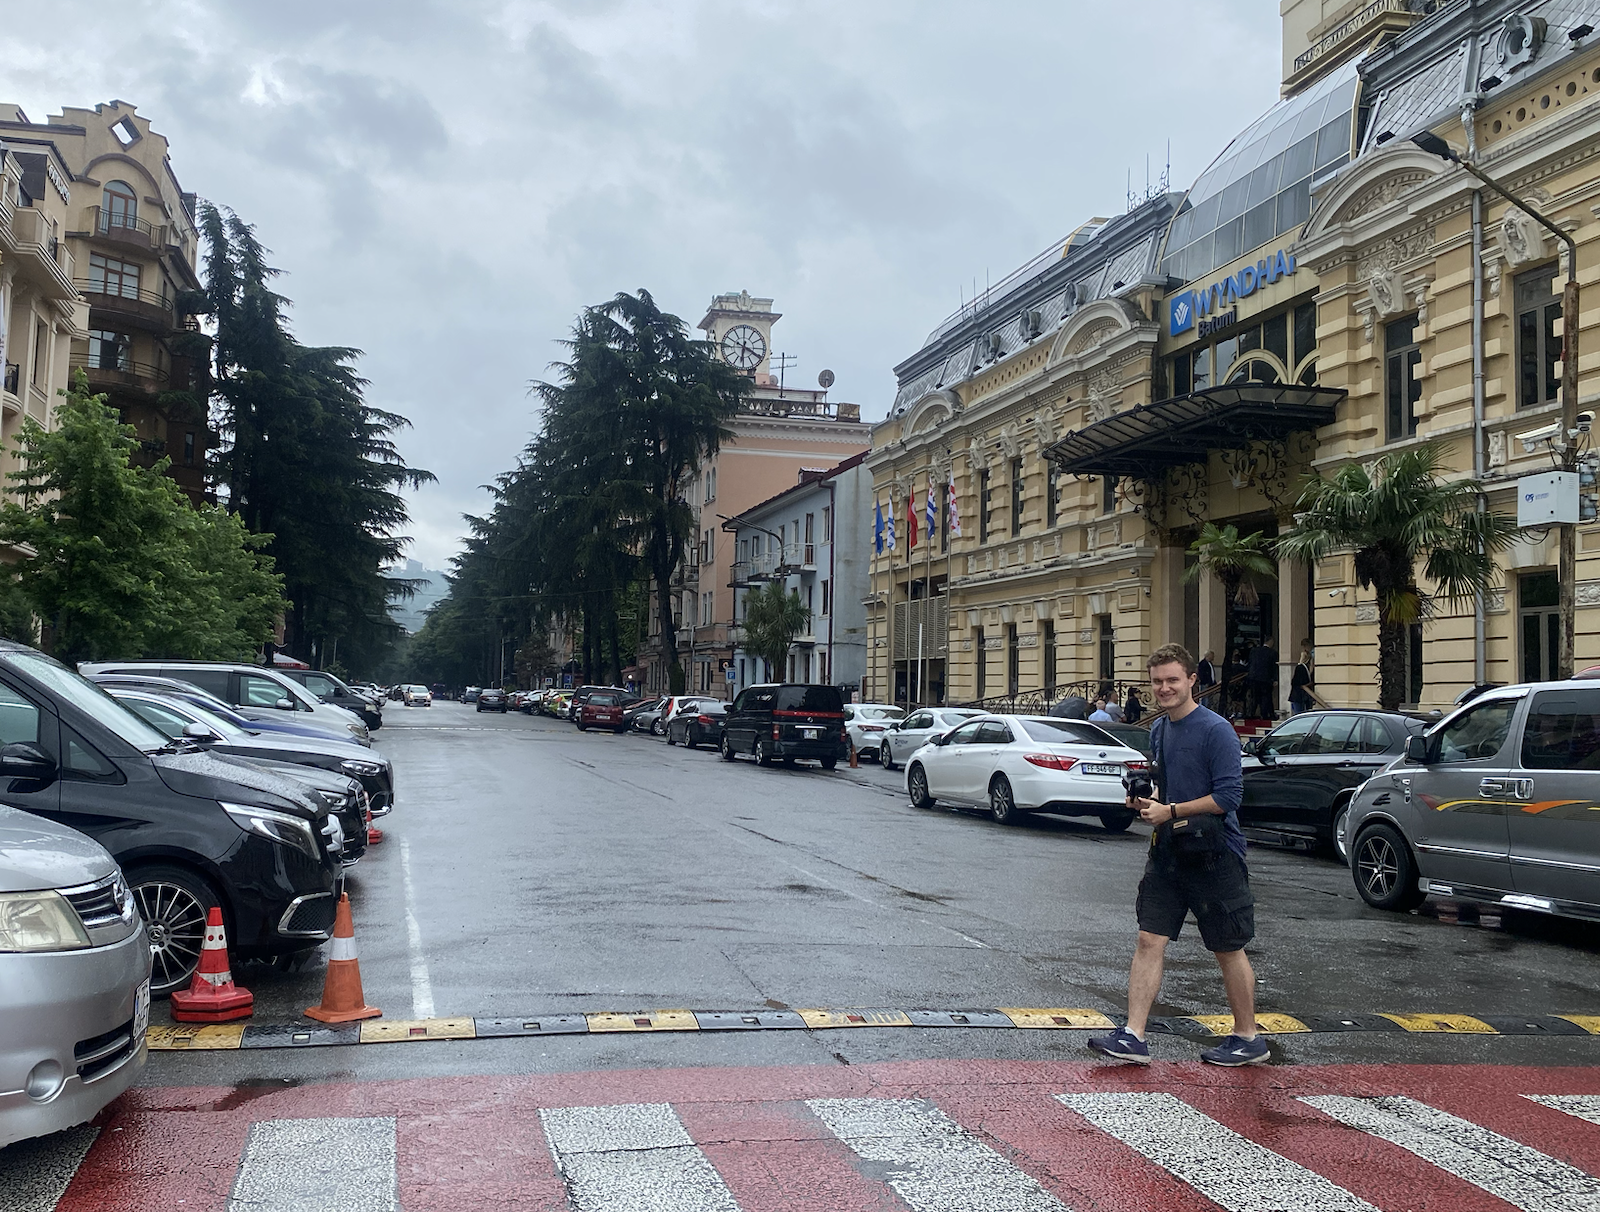 Michael Braithwaite '24 puts his camera away after photographing one of Batumi’s downtown streets. Photo by Zeke Lloyd '24.